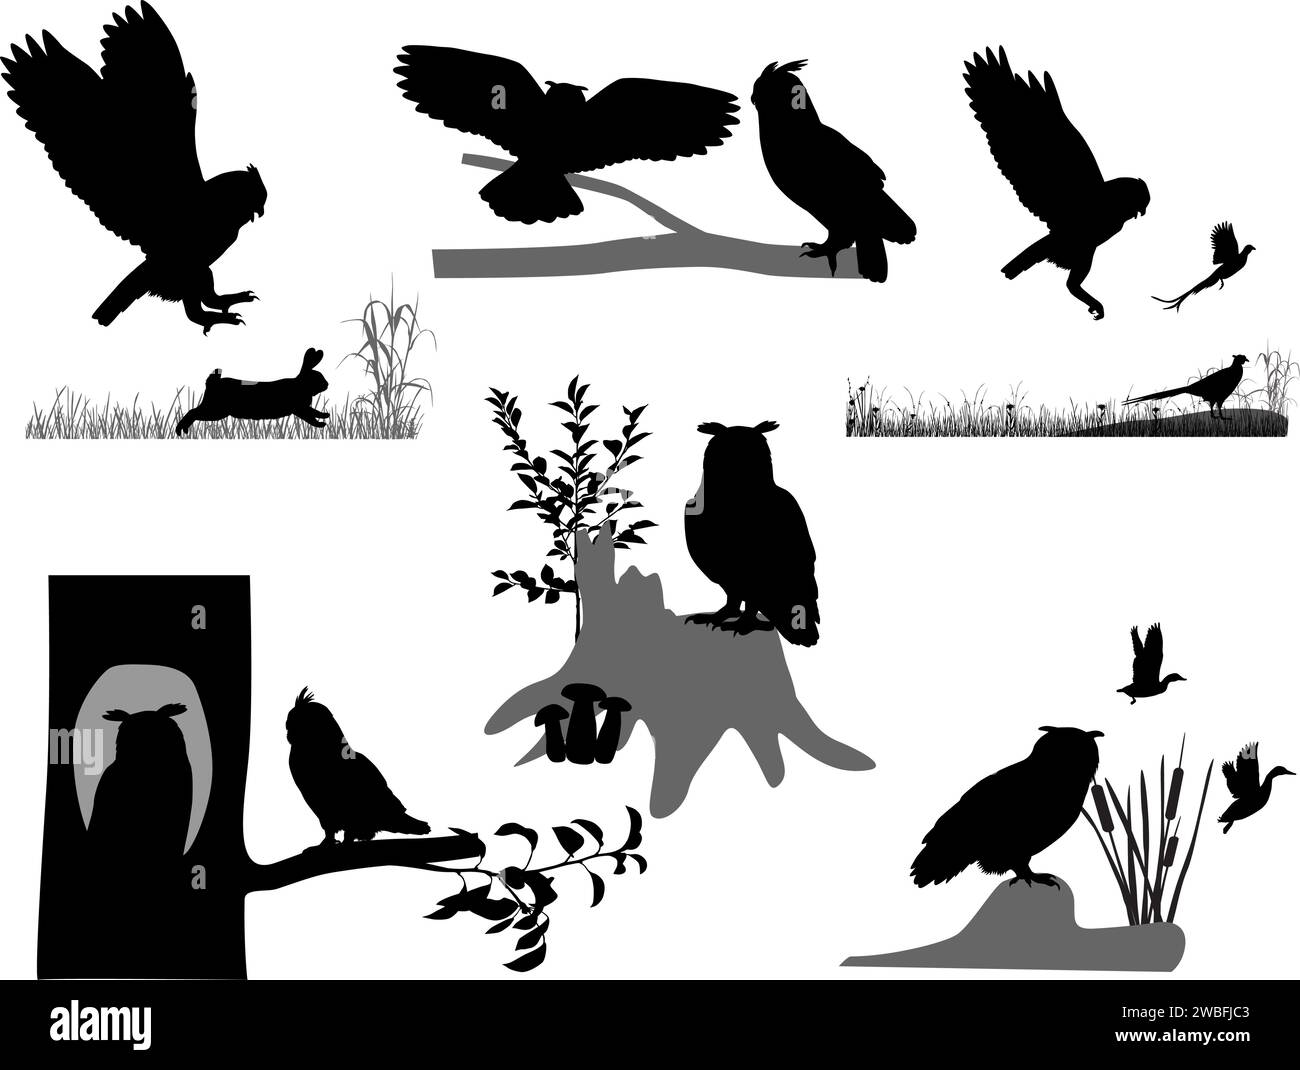 Silhouettes of owls and eagle-owls birds in wildlife and outdoors Stock Vector